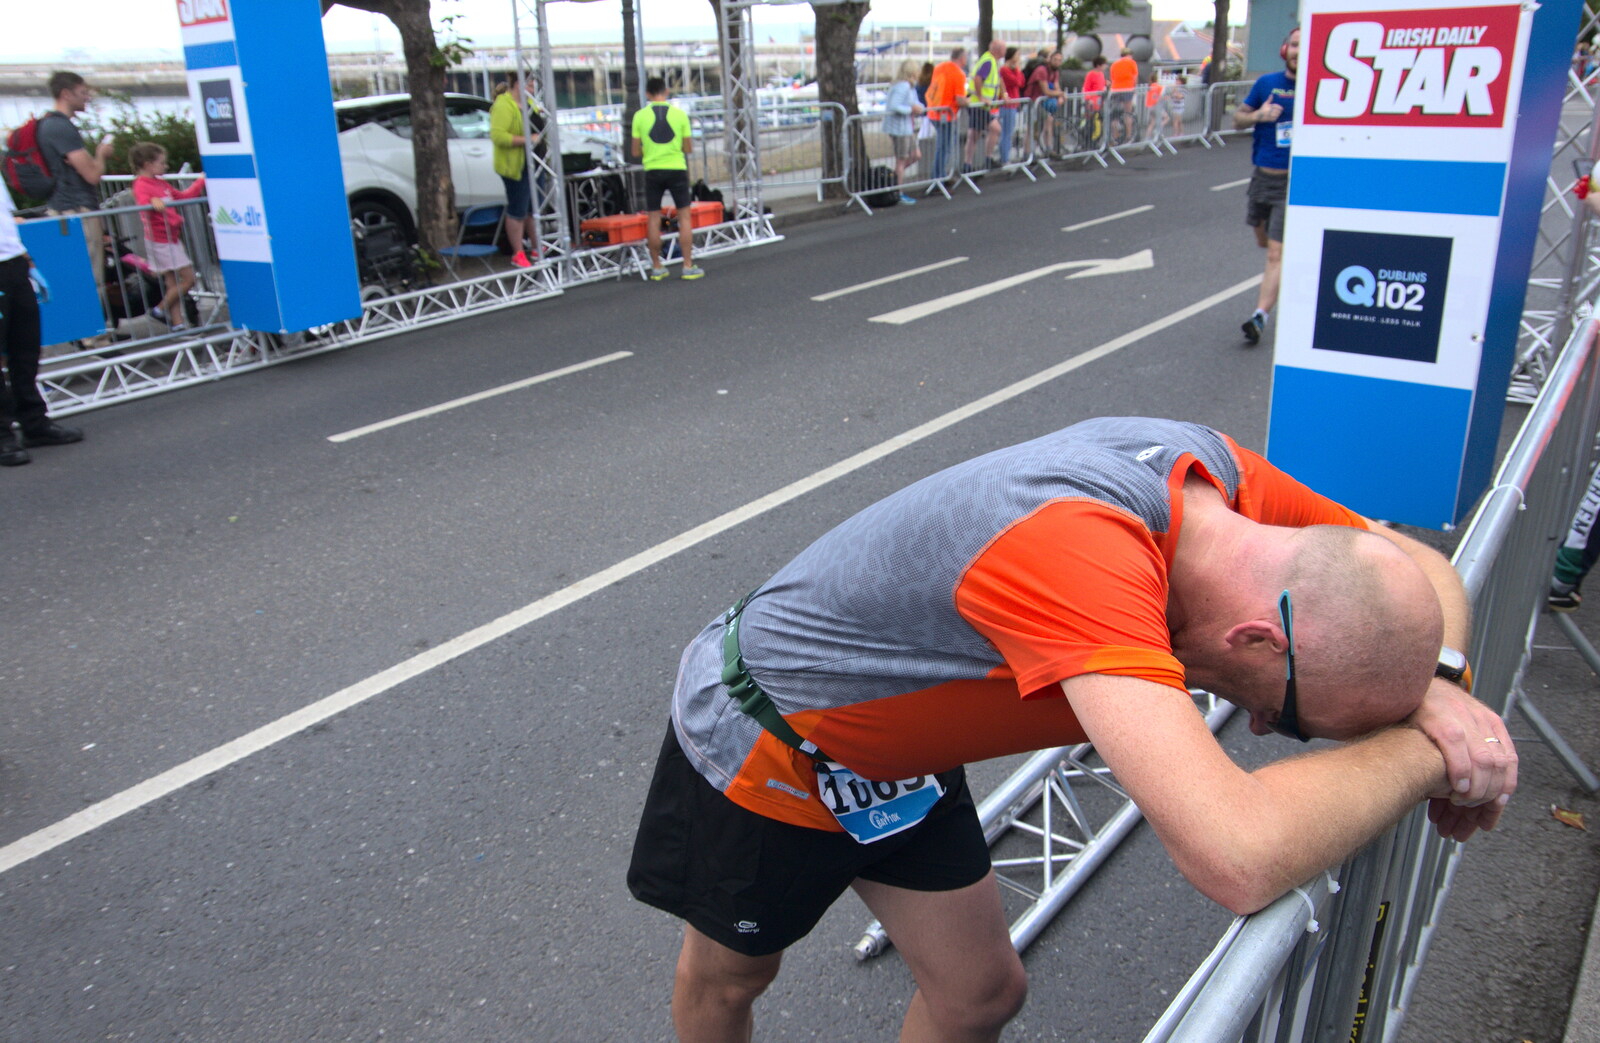 Another exhausted runner from The Dún Laoghaire 10k Run, County Dublin, Ireland - 6th August 2018